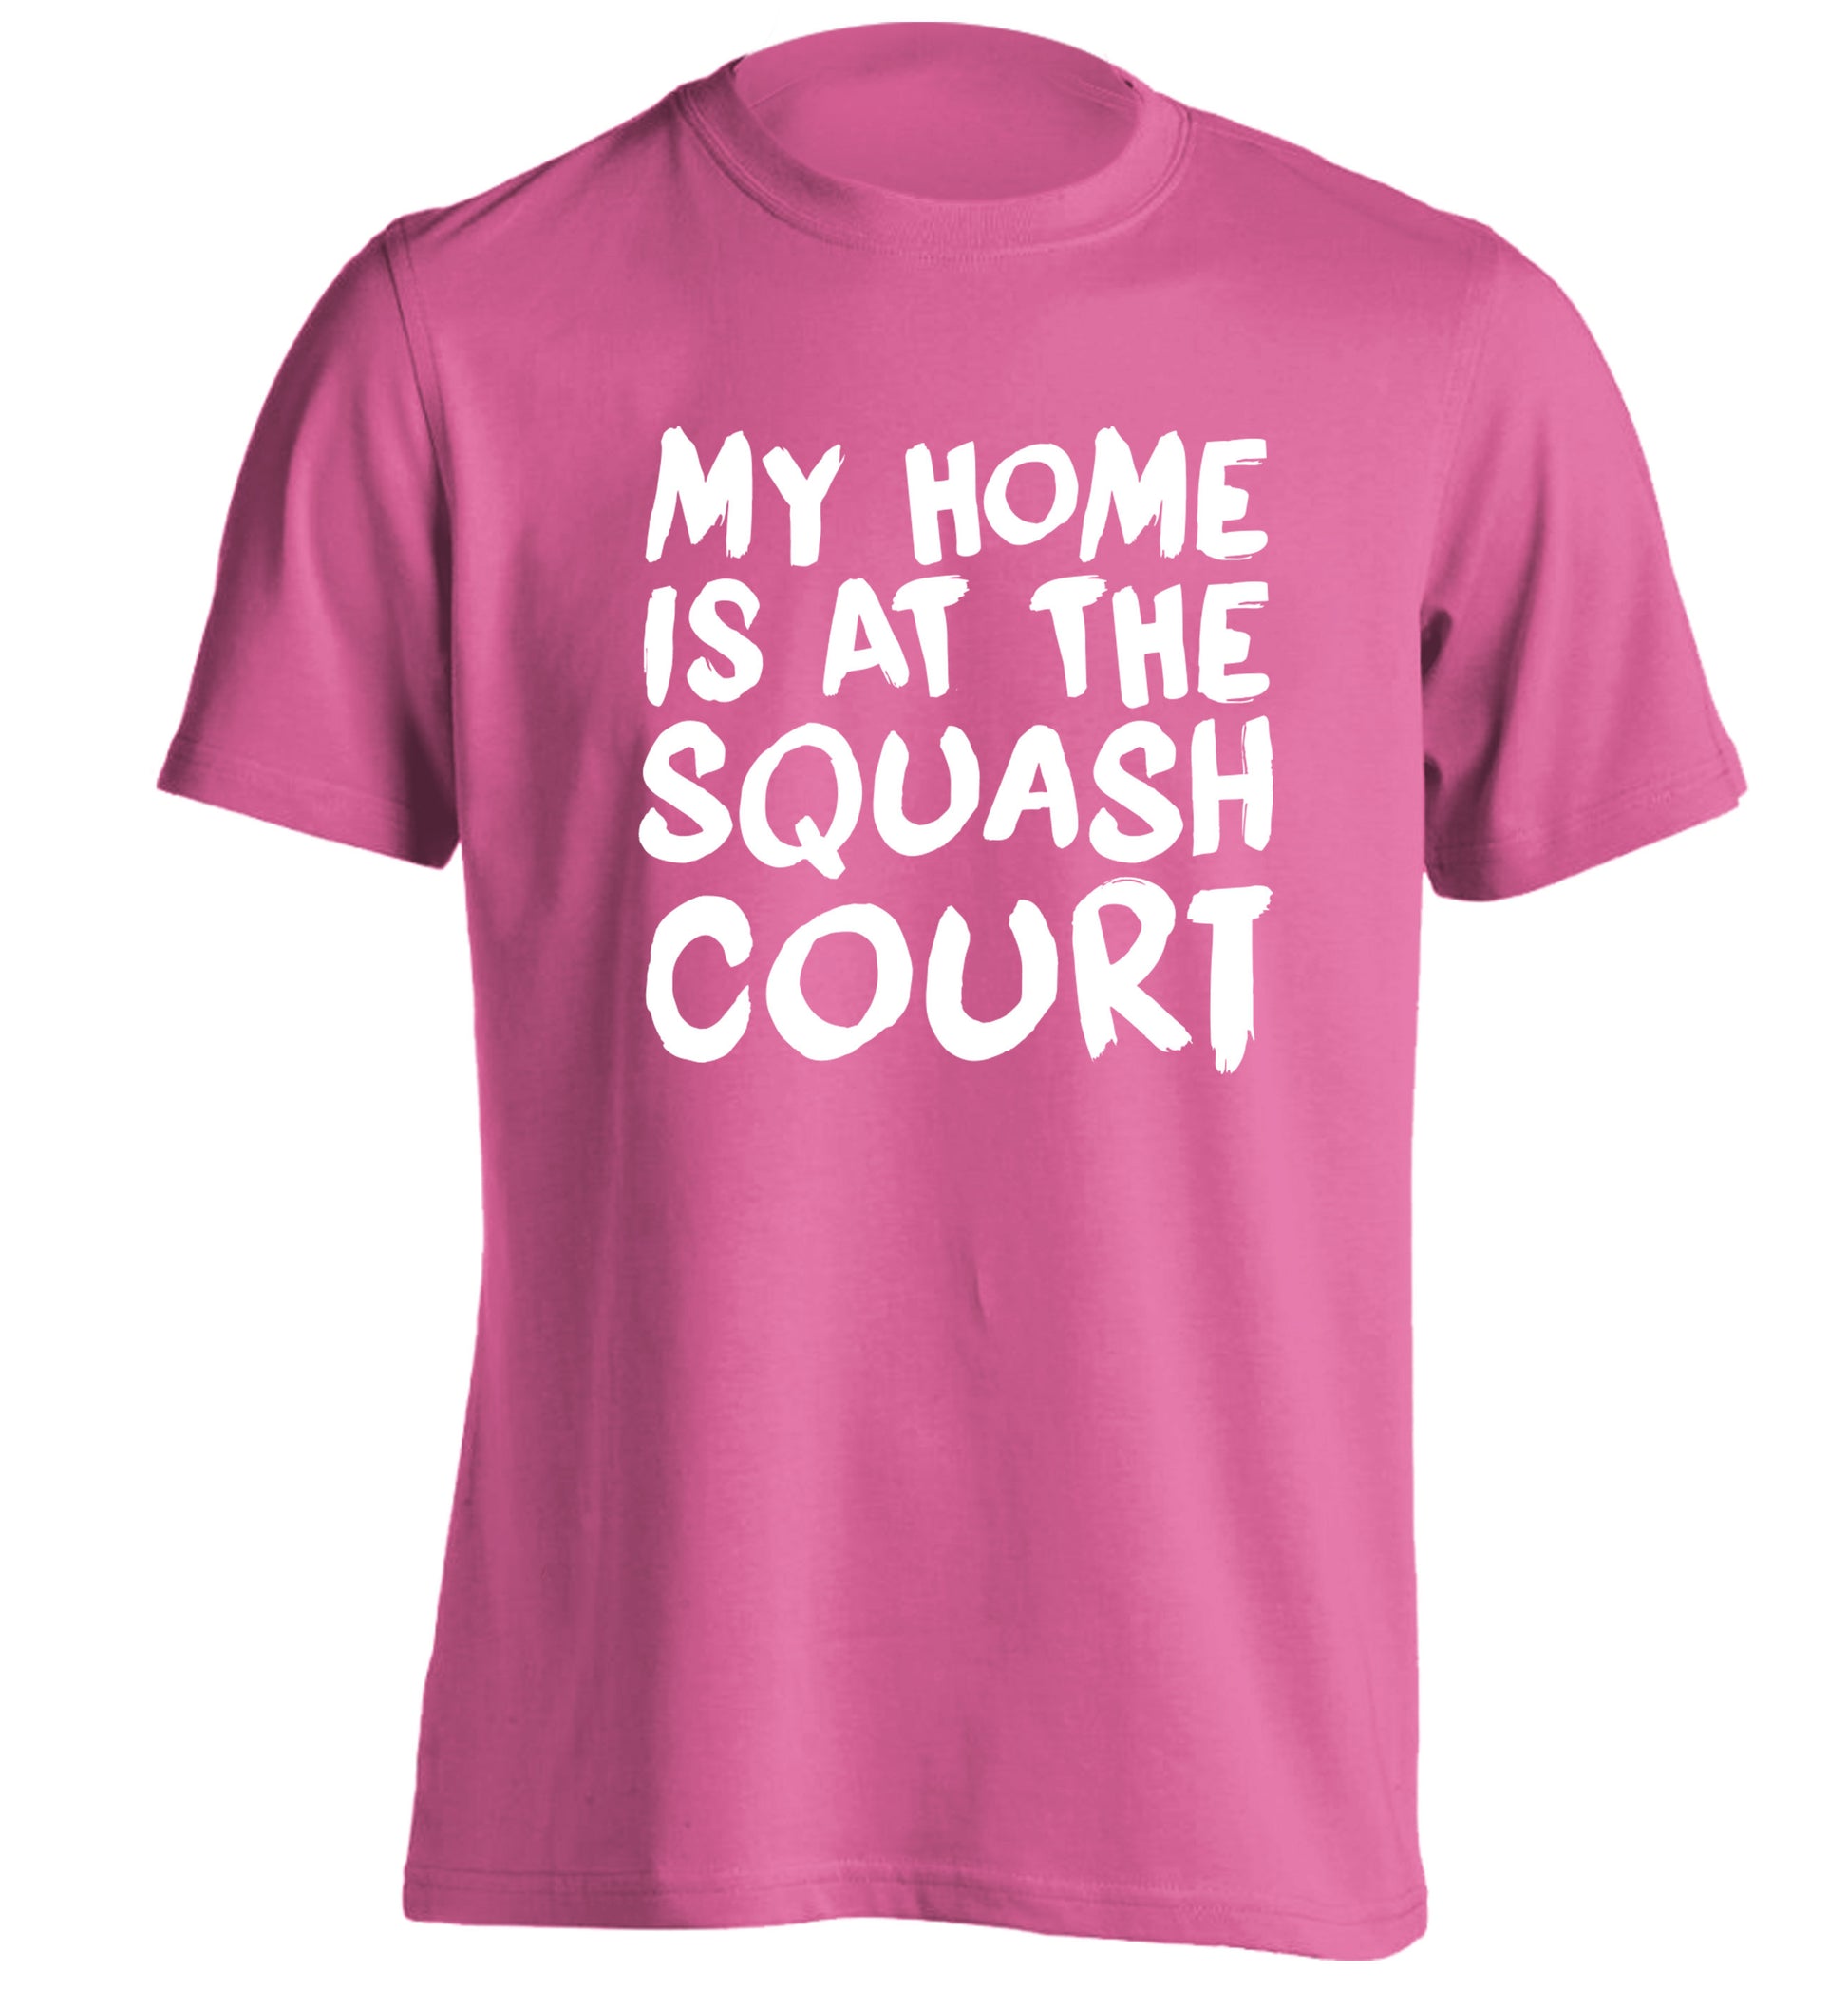 My home is at the squash court adults unisex pink Tshirt 2XL